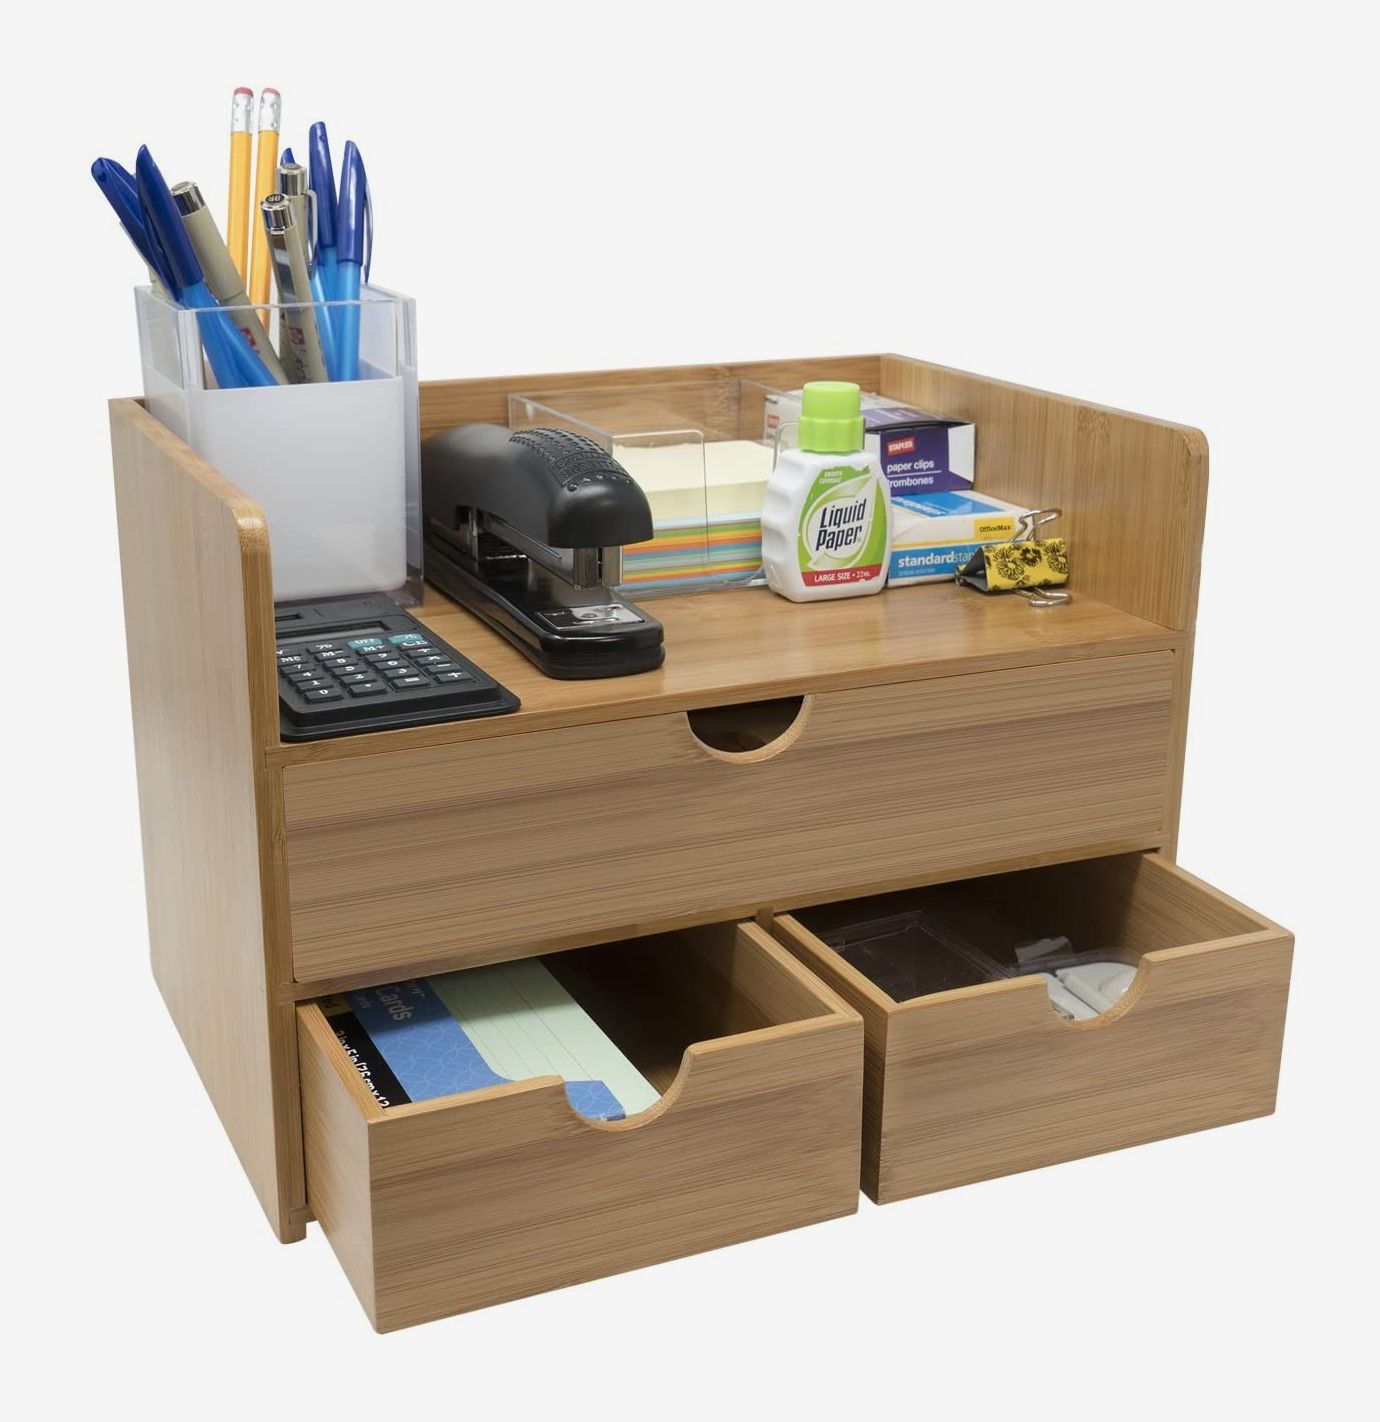 Great Office Table Workspace & Store Files 4 Full Size Wood Desk Organizer